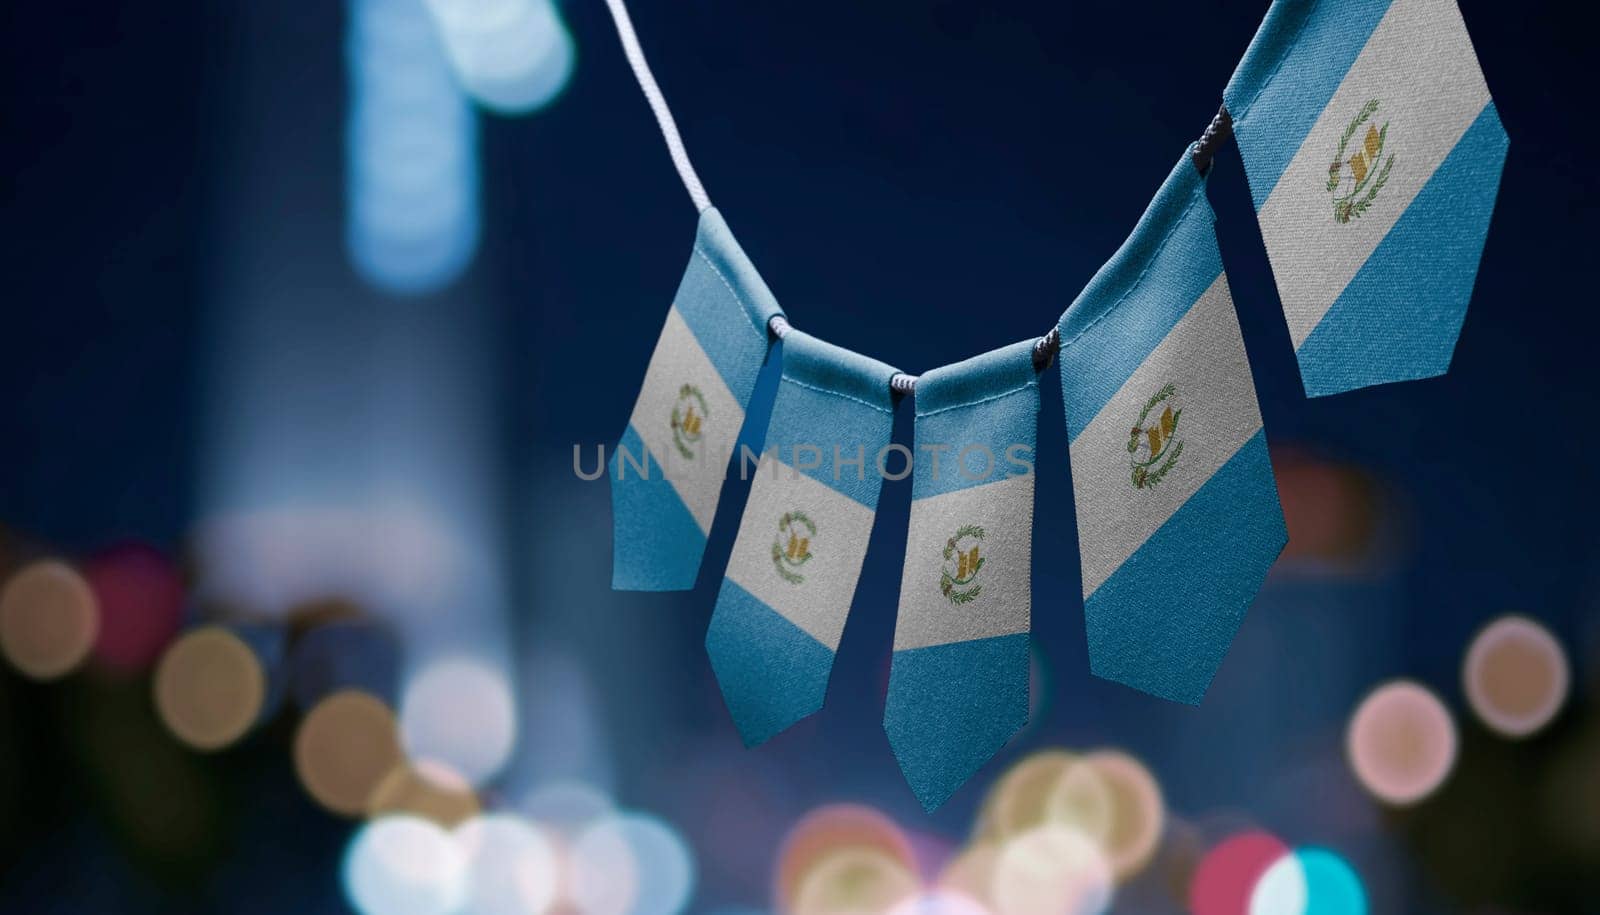 A garland of Guatemala national flags on an abstract blurred background.